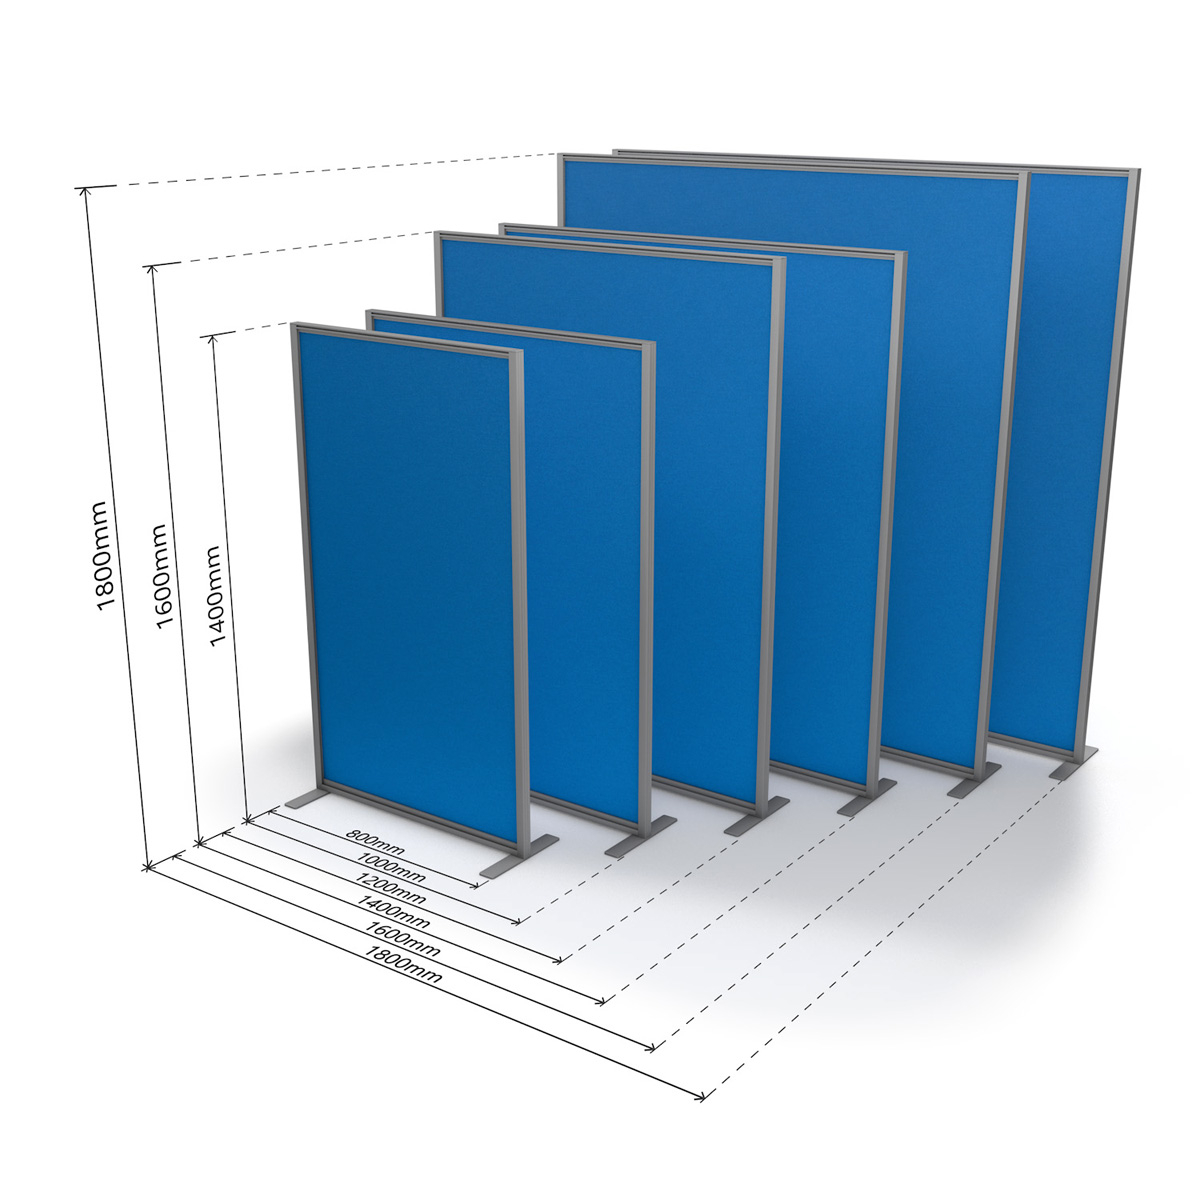 Dimensions of FRONTIER® Free Standing Office Partitions